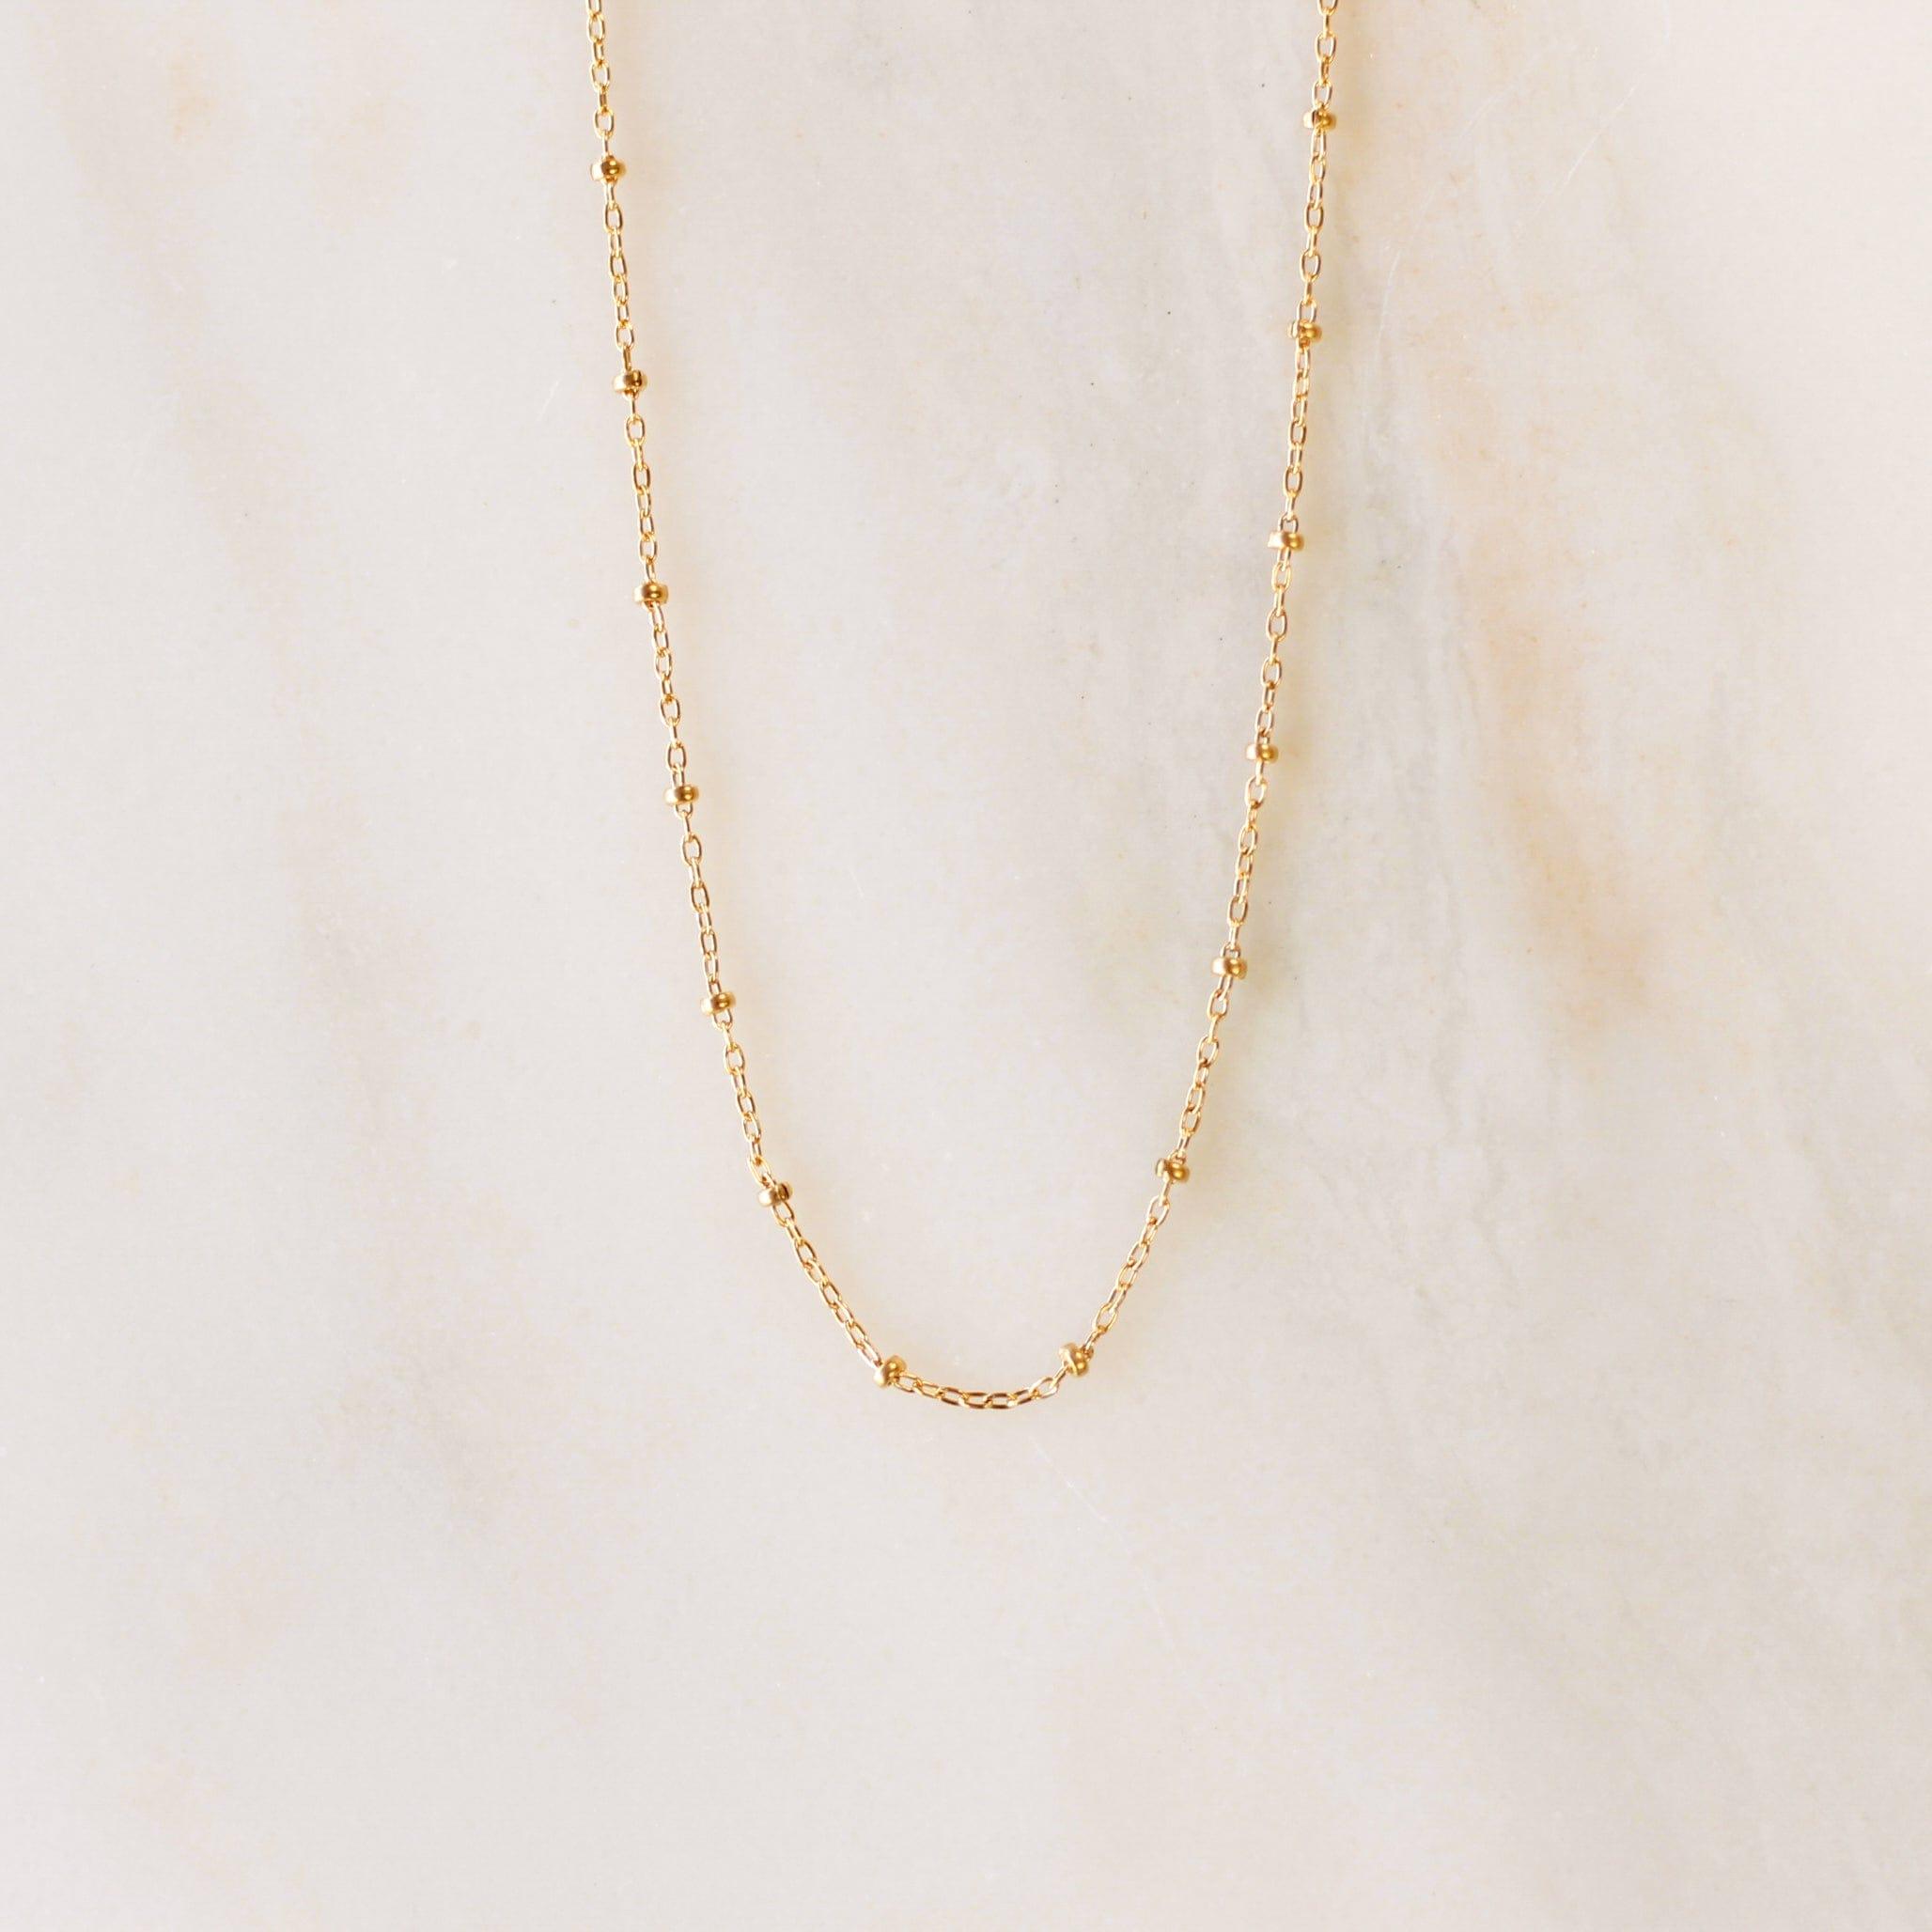 Satellite Chain Necklace - Nolia Jewelry - Meaningful + Sustainably Handcrafted Jewelry